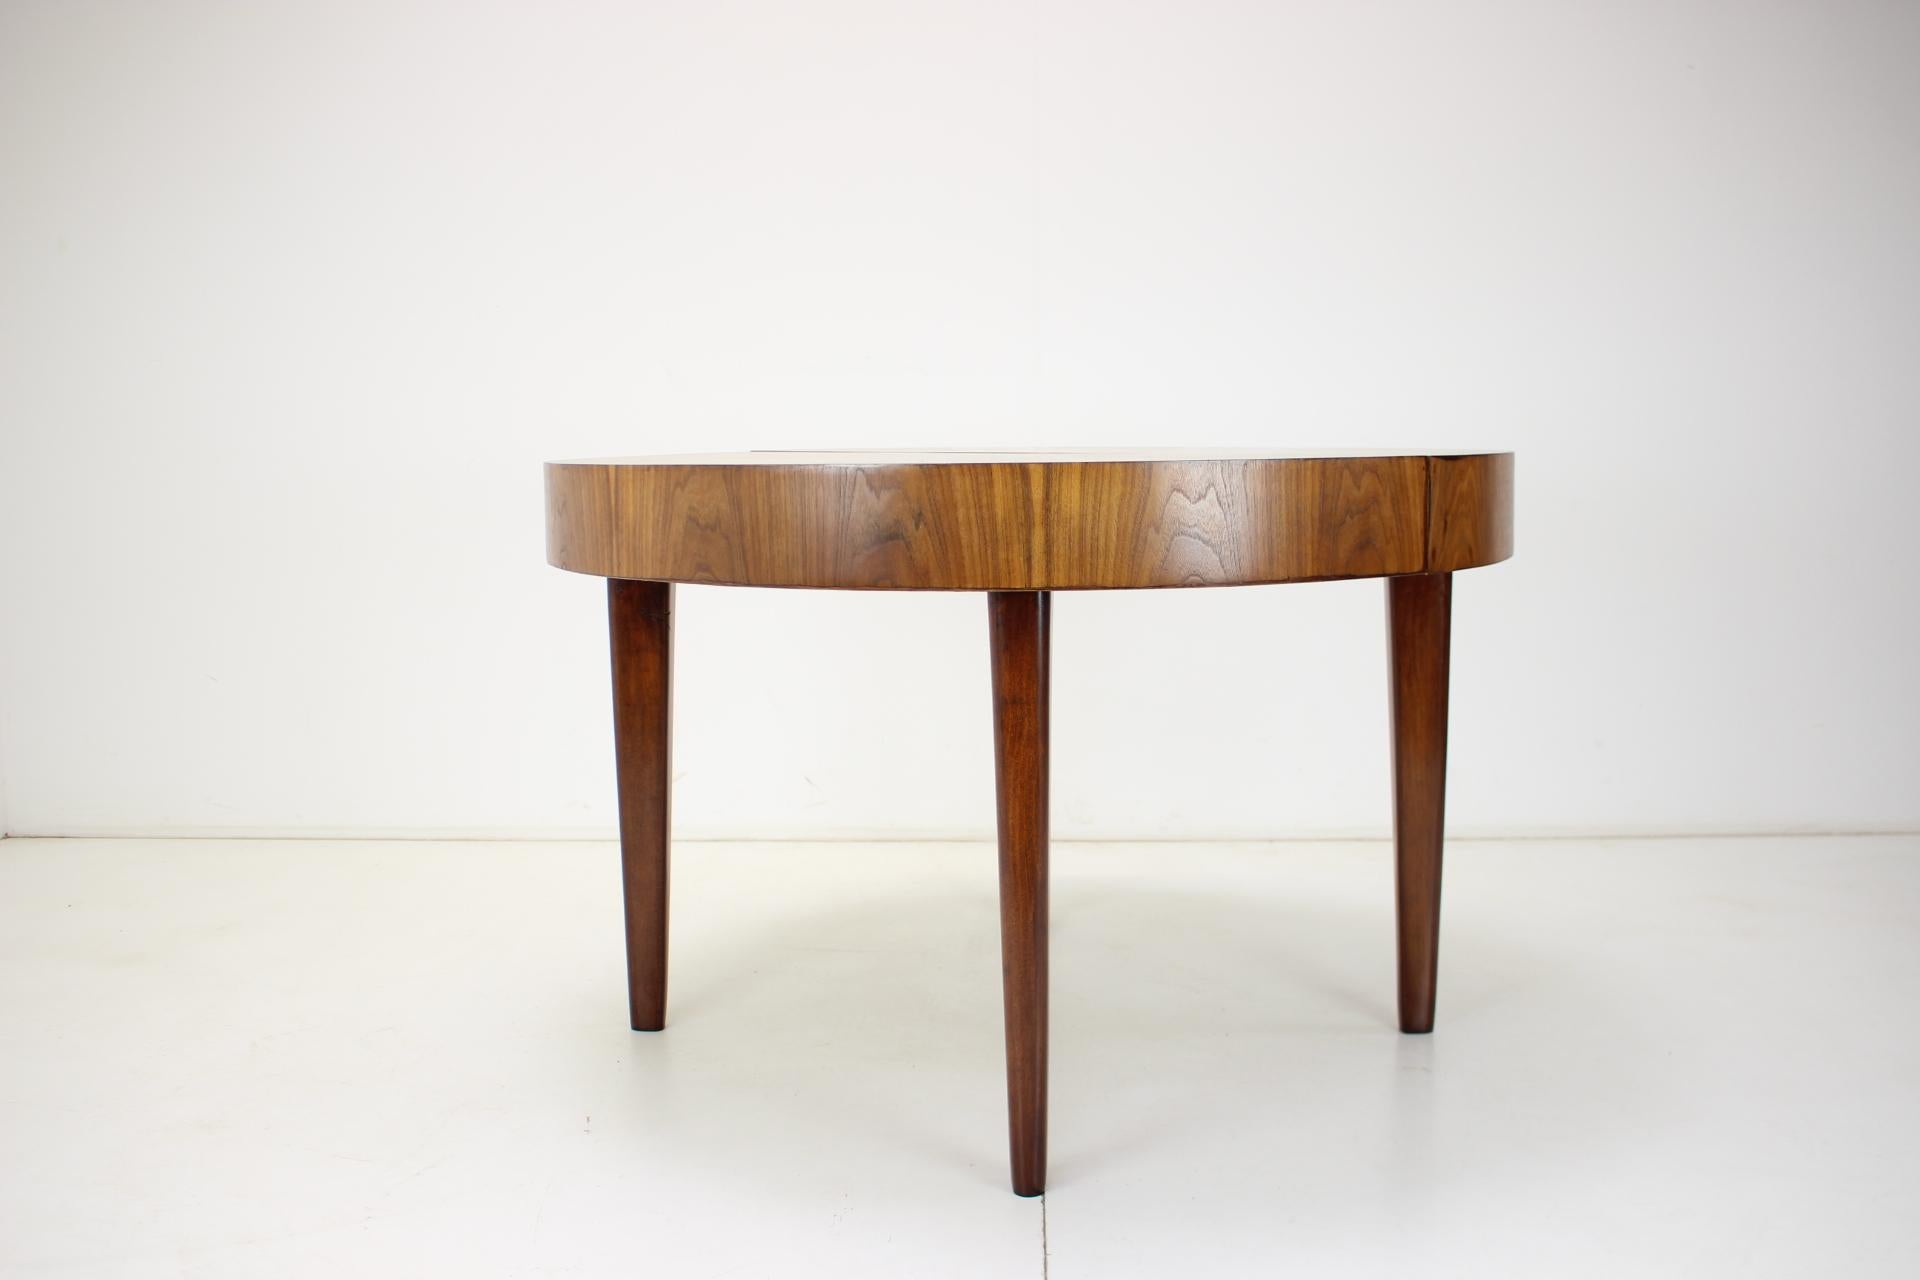 Nutwood Art Deco Extendable Dining Table, 1930's, Restored